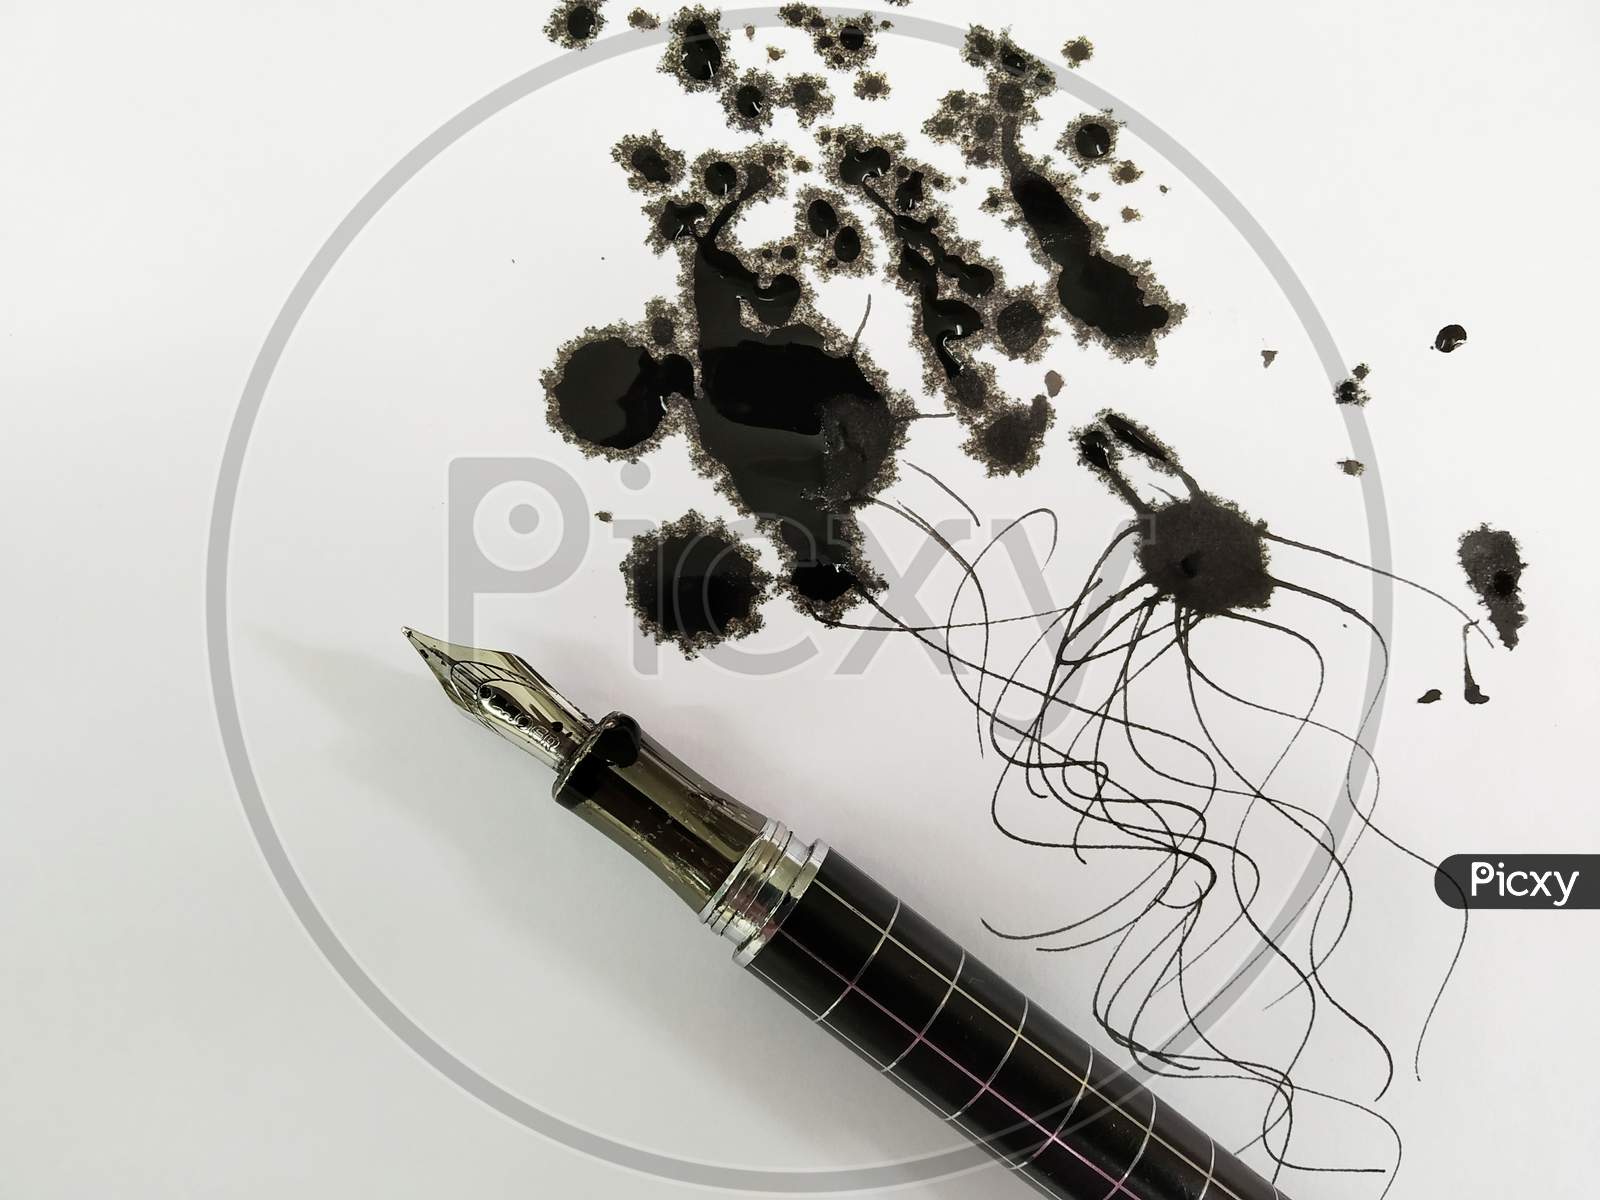 A Ink Pen With Black Ink Spread On Paper